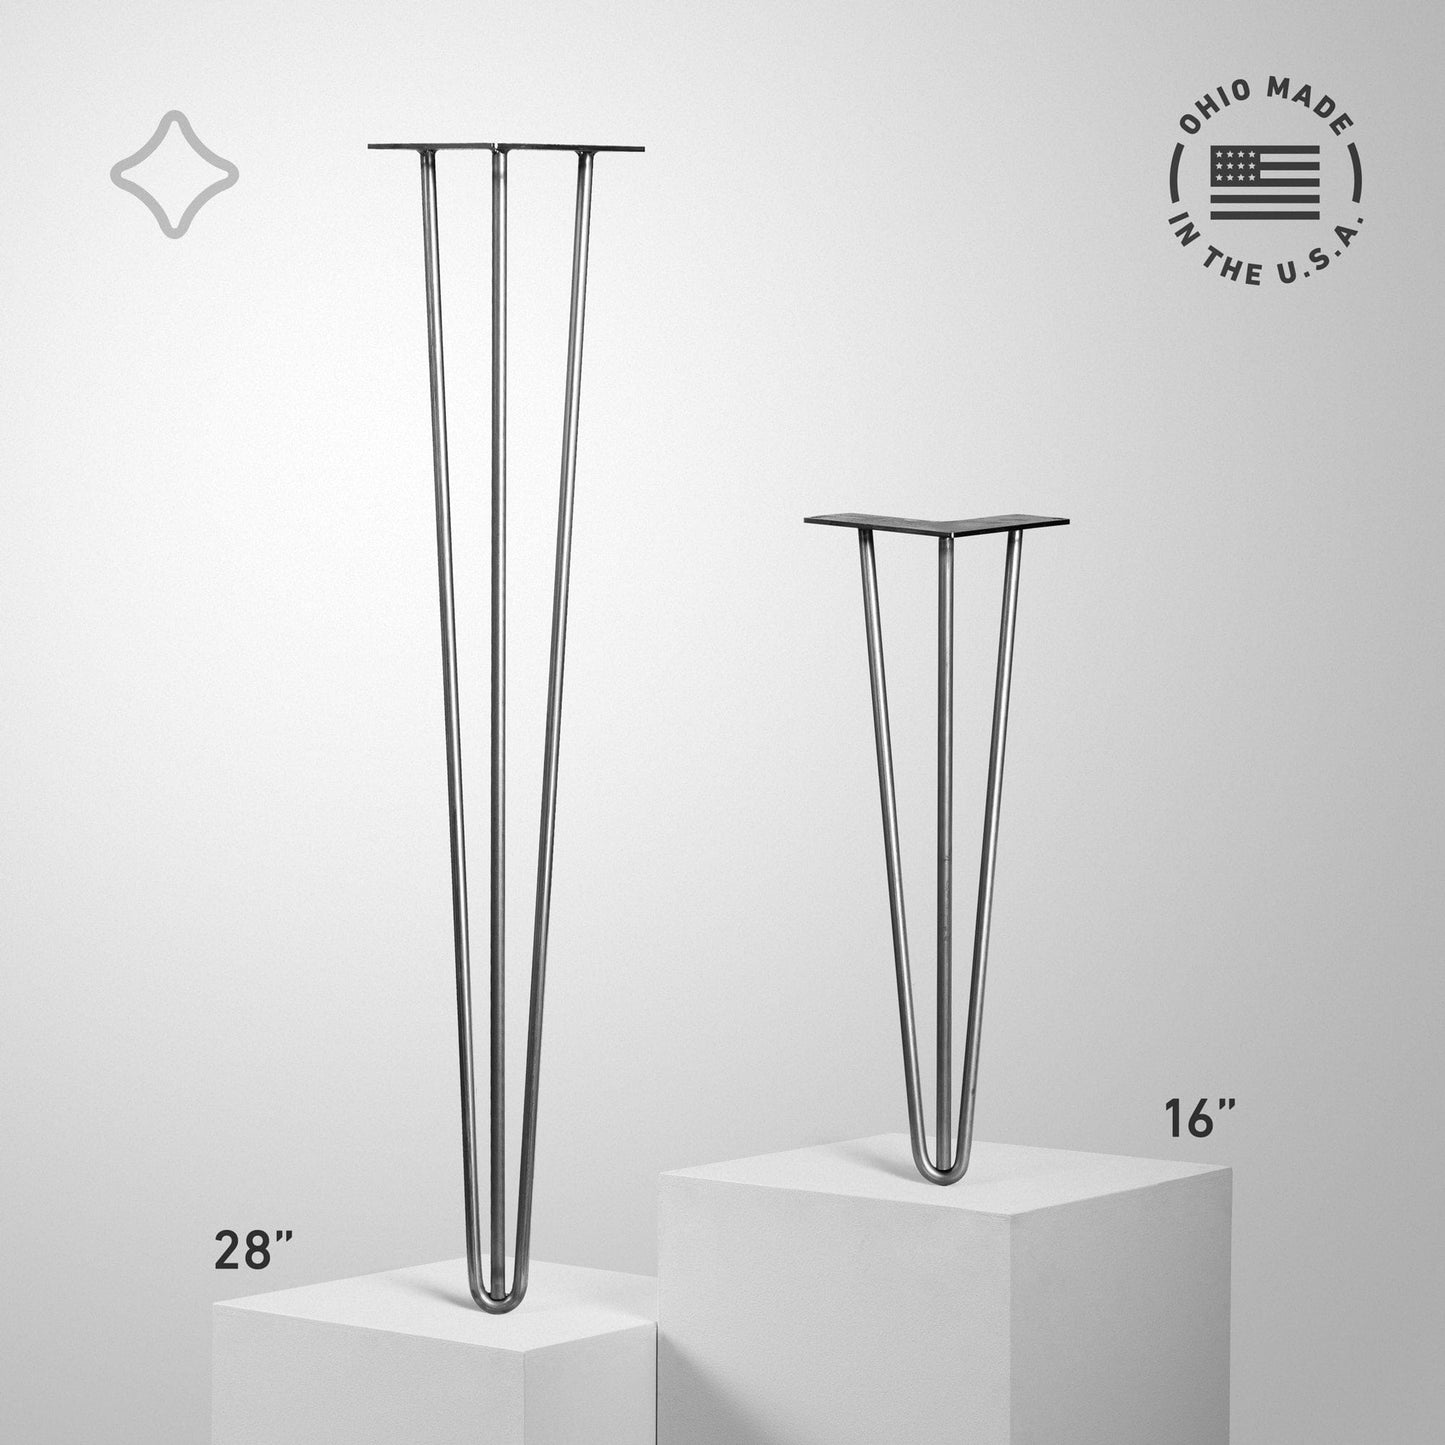 28 inch and 16 inch height three rod hairpin legs shown in unfinished steel